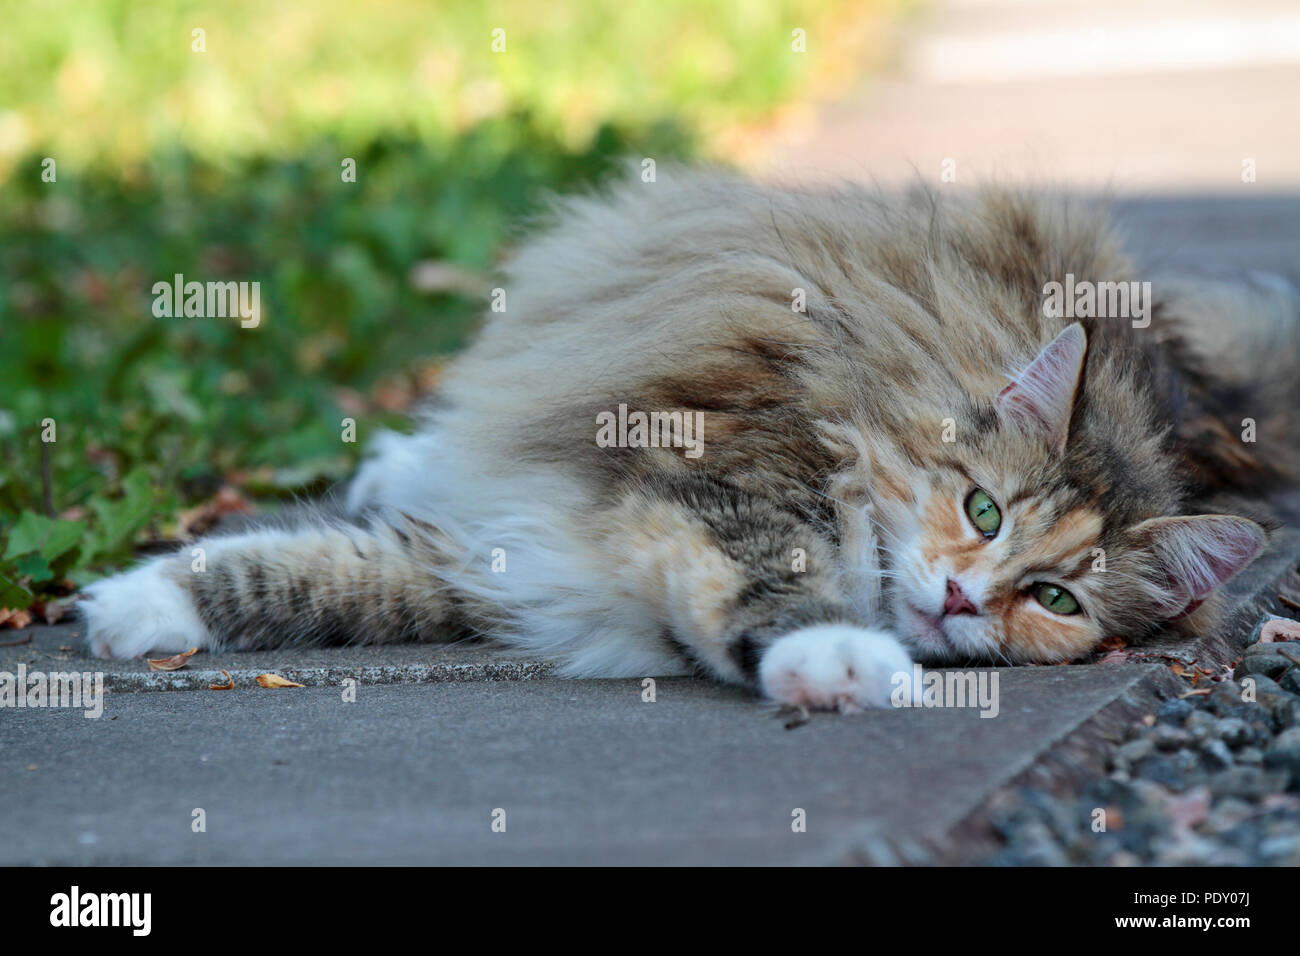 Norwegian forest cat female resting on pavement Stock Photo